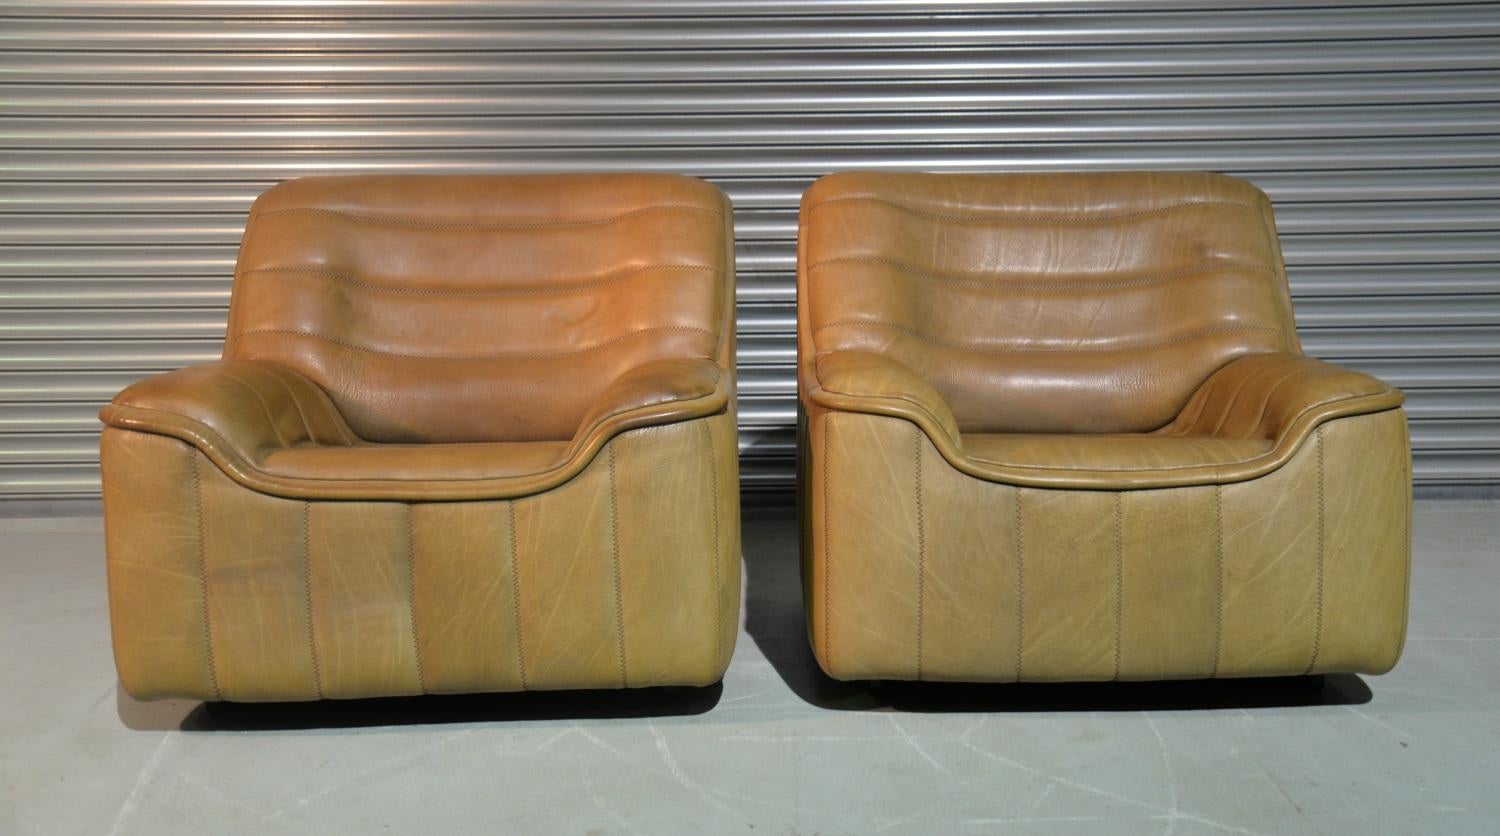 Discounted airfreight for our US and International customers (from 2 weeks door to door)

We are delighted to bring to you a pair of ultra rare vintage De Sede DS 84 armchairs. Hand built in the 1970s by de Sede craftsman in Switzerland, these